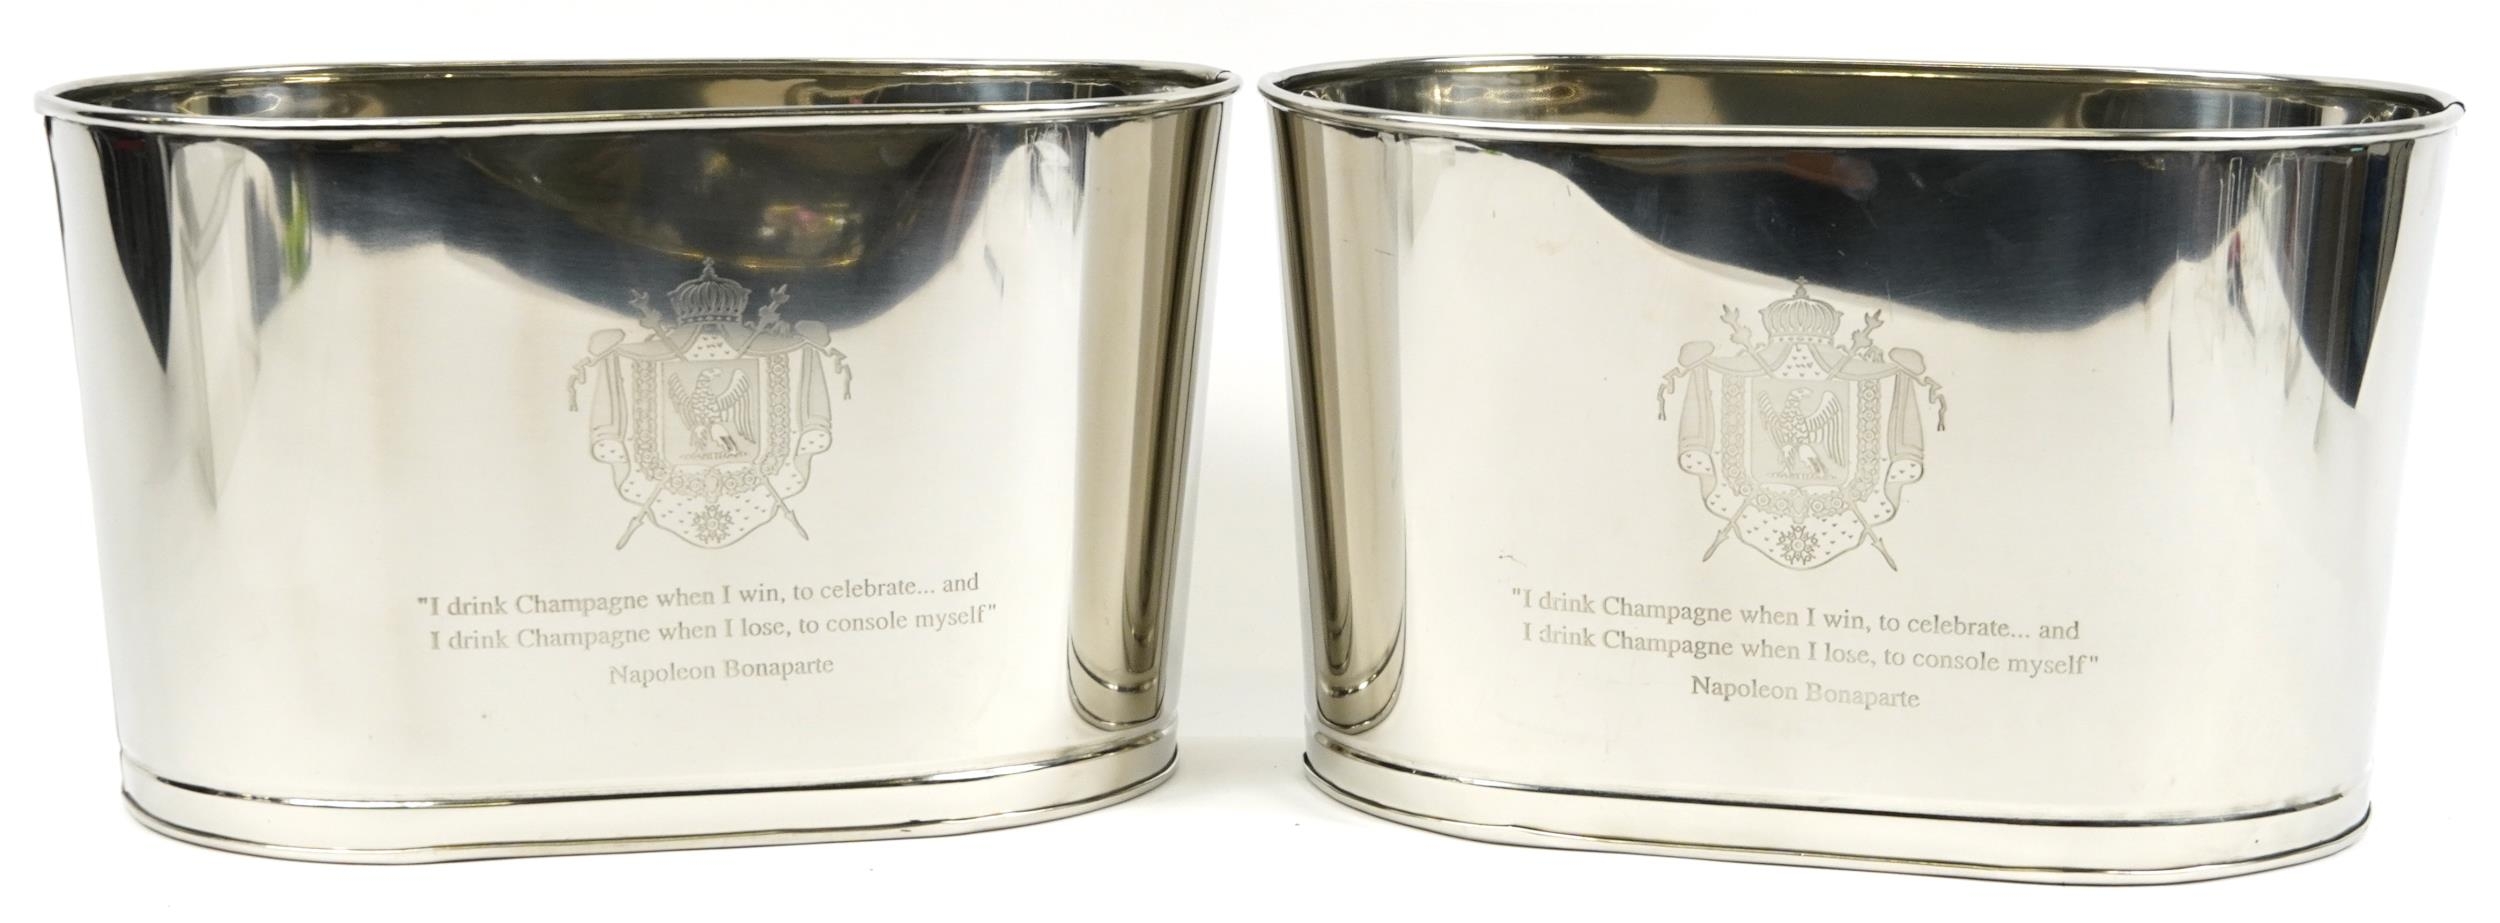 Pair of Champagne ice buckets with Lily Bollinger and Napoleon Bonaparte mottos, each 25cm high x